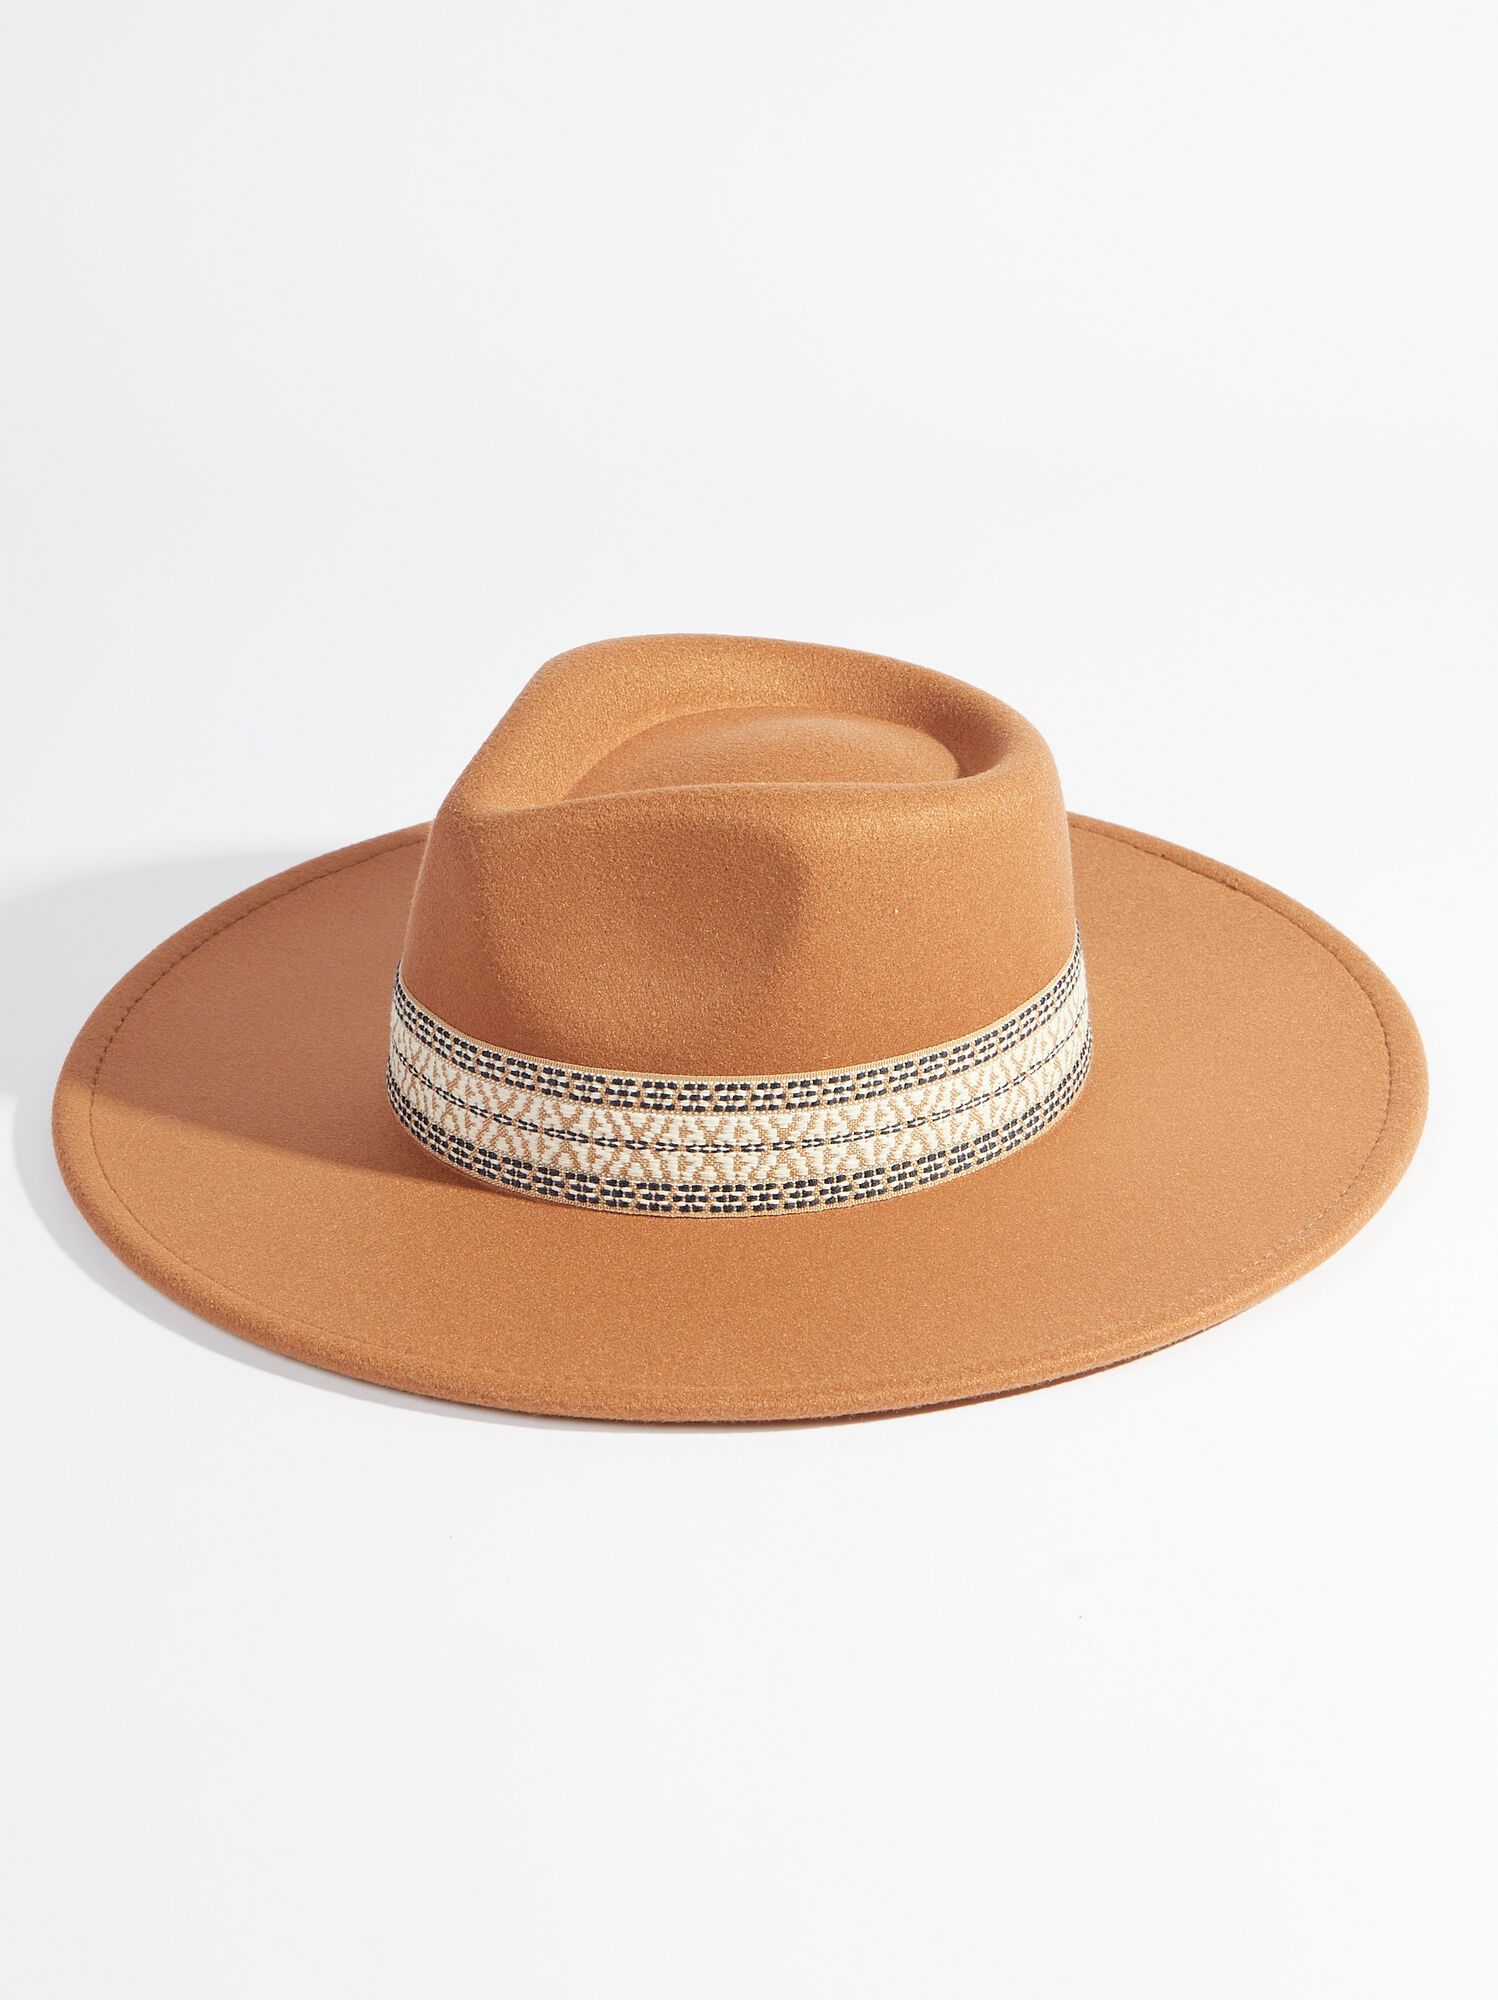 Cassidy Hat - Brown | Altar'd State